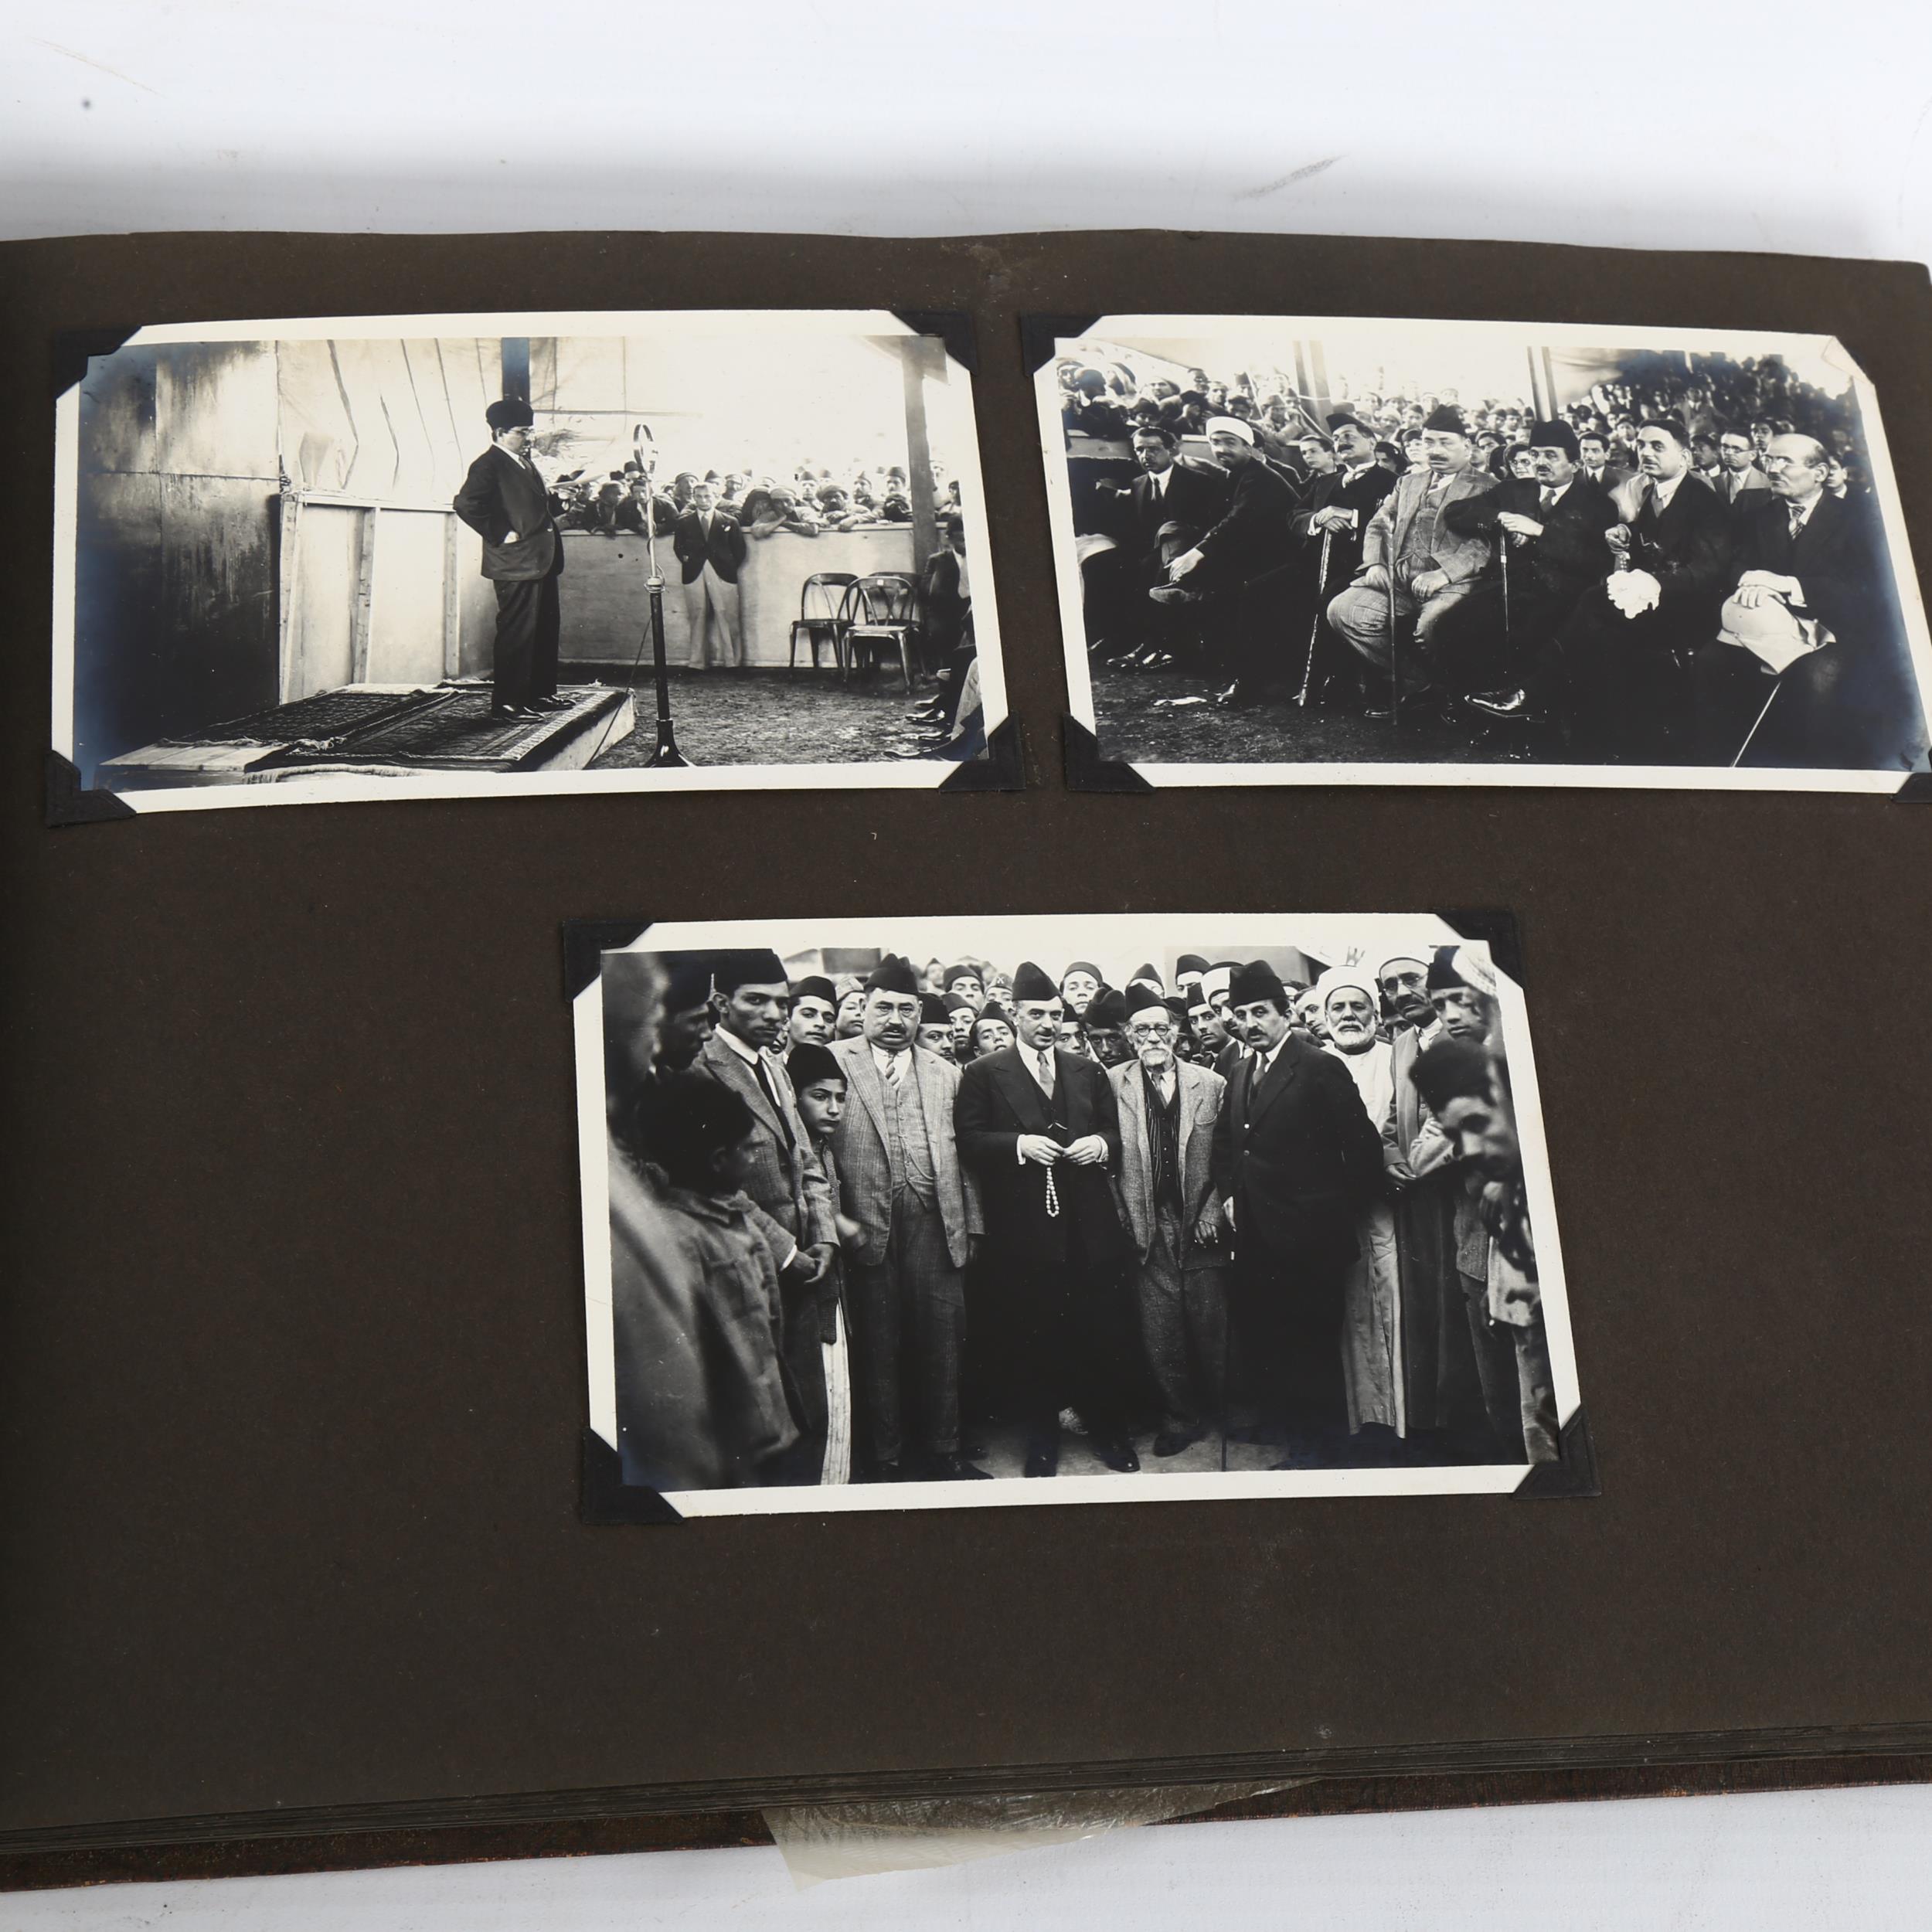 A photo album of circa early 1930s' photos from Iraq, most of dignitaries including King Faisal I - Image 3 of 3